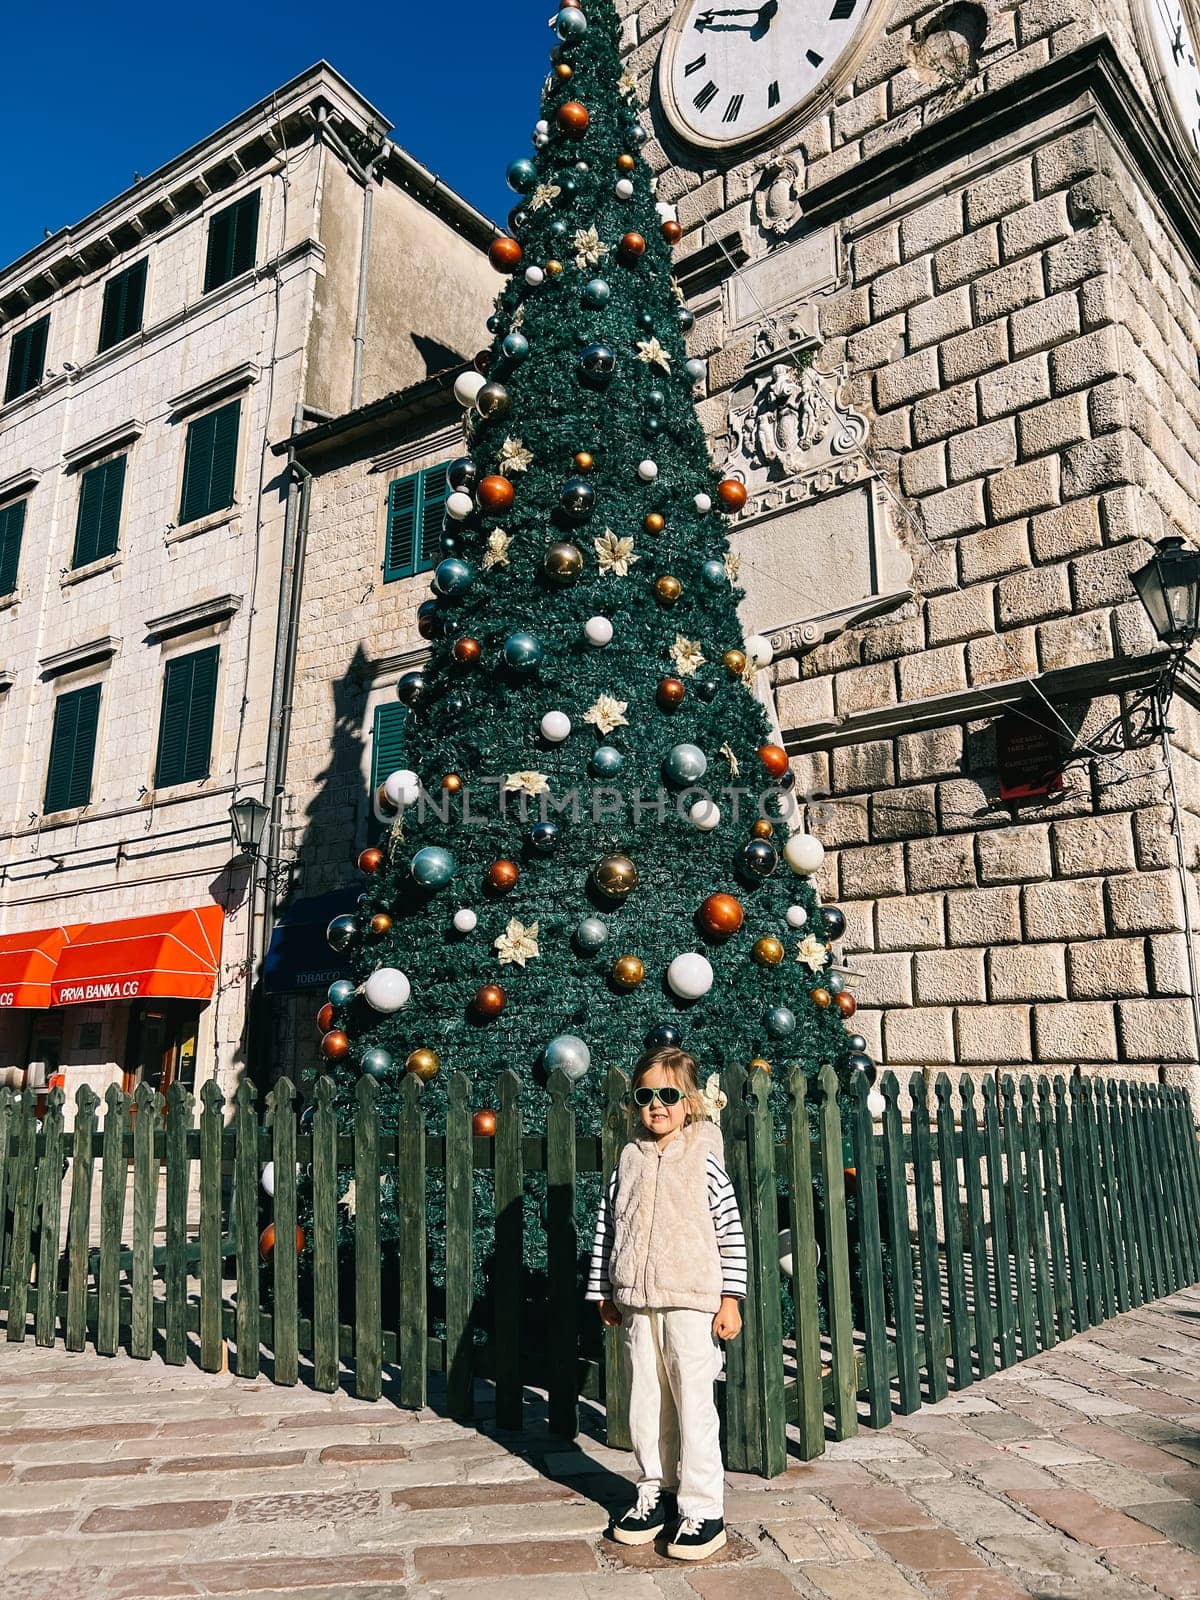 Little girl posing near the Christmas tree near the ancient building. High quality photo